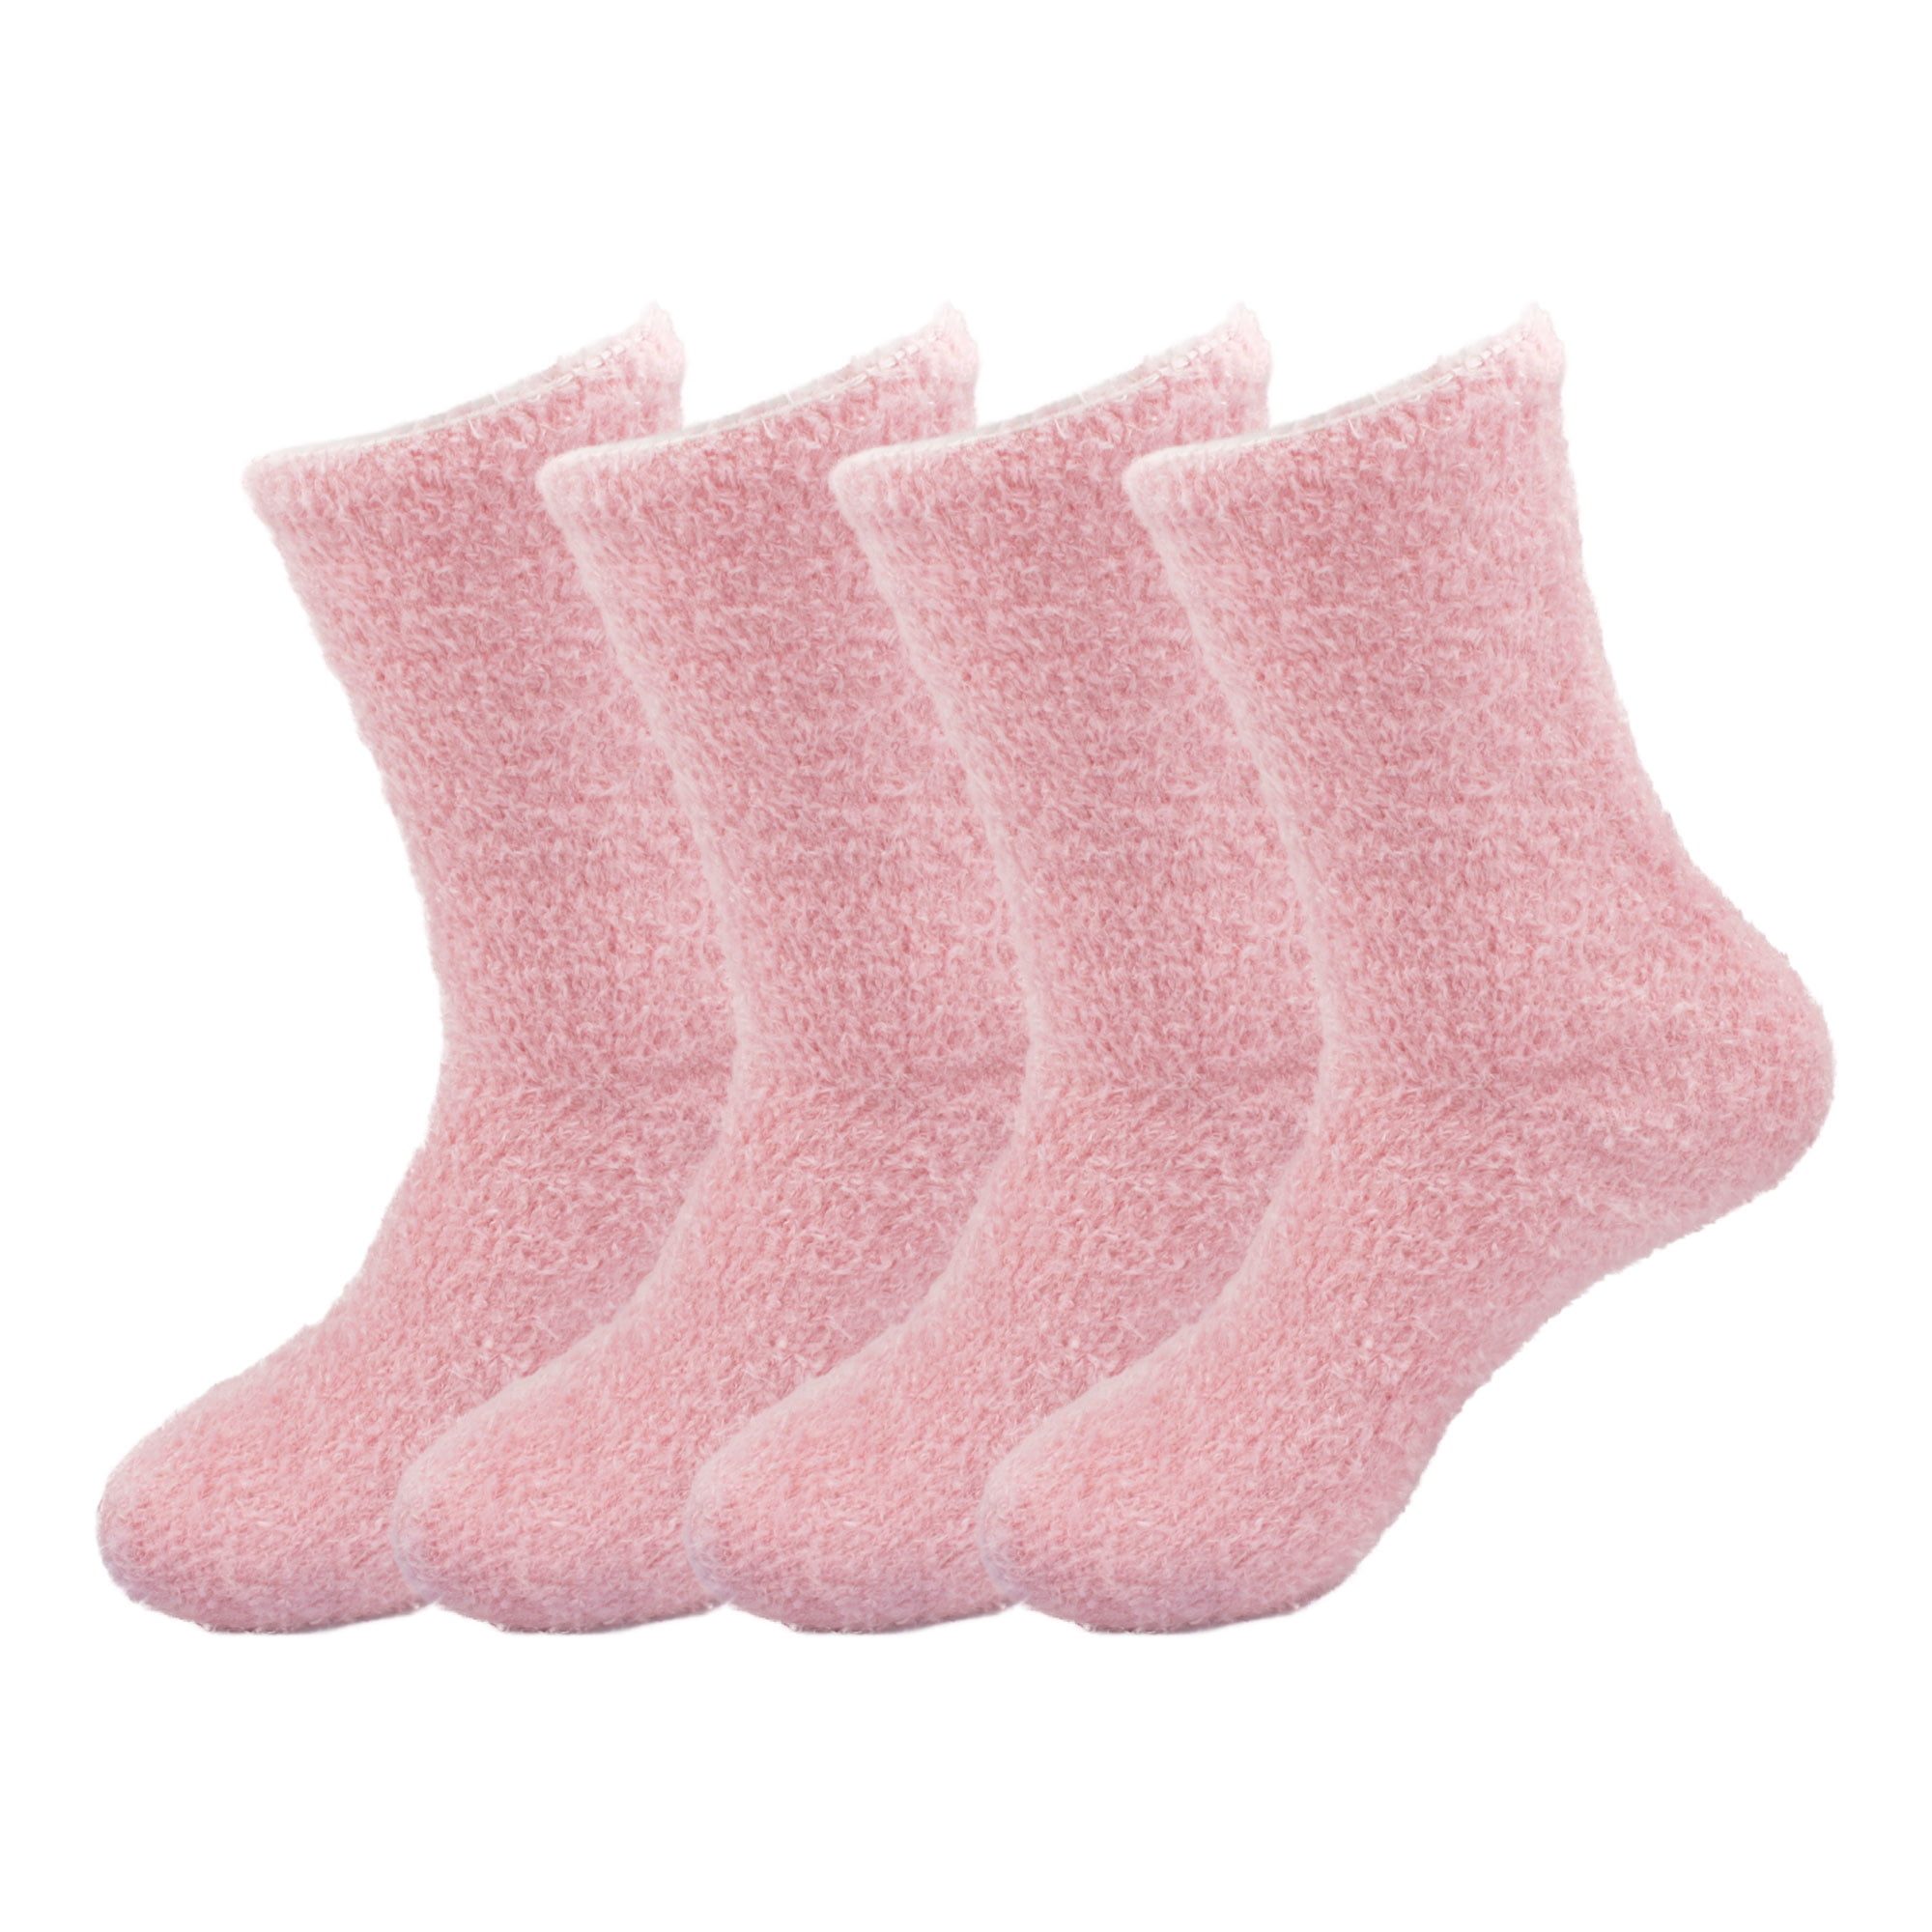 Women's Super Soft and Cozy Feather Light Fuzzy Home Socks